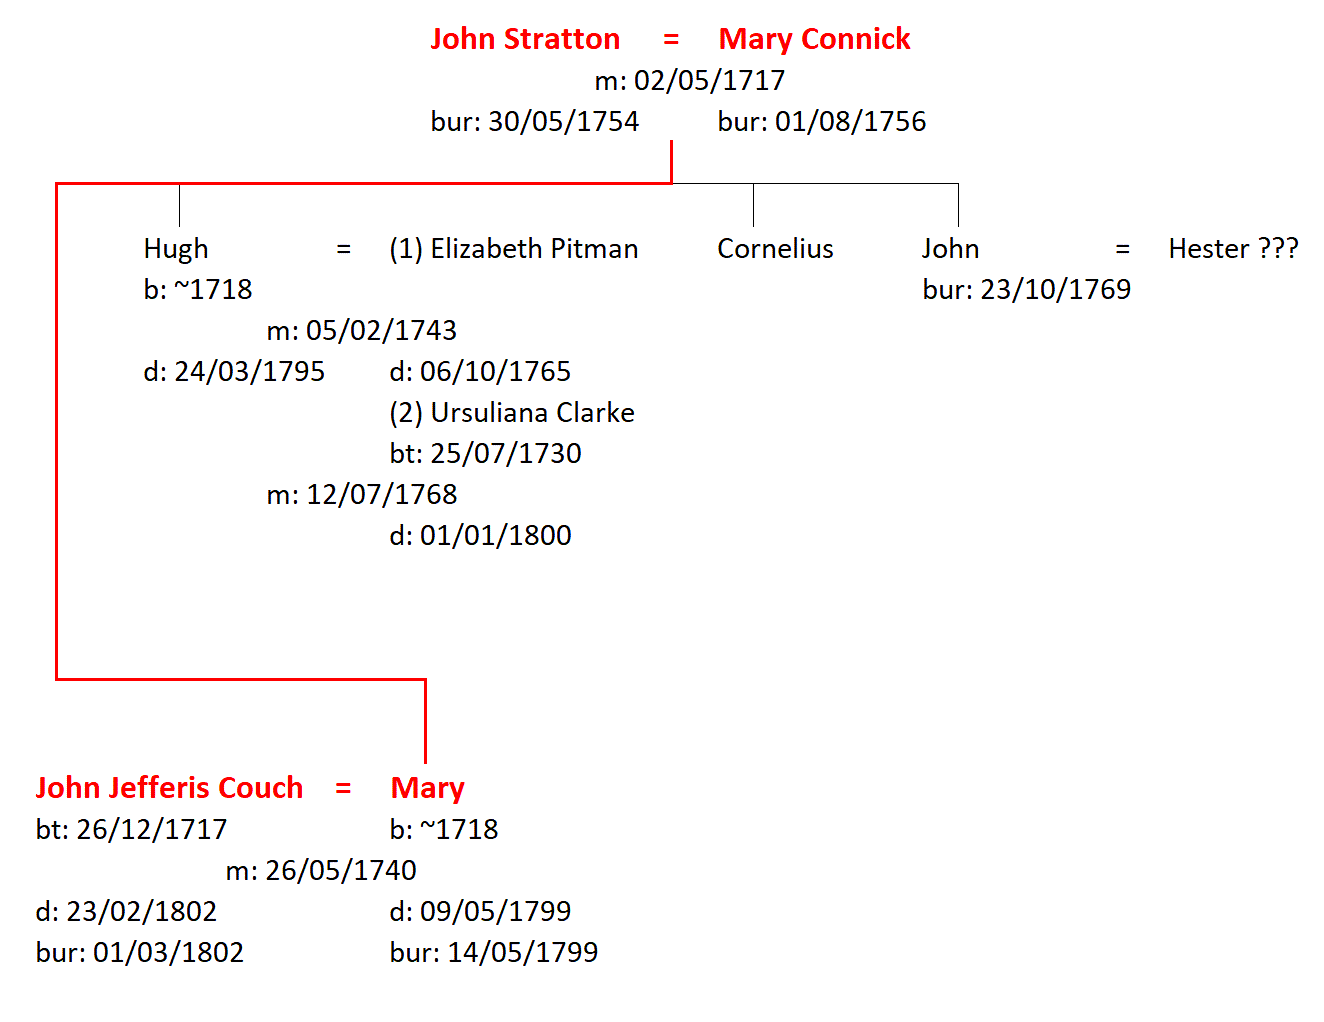 Figure 1: Family of John and Mary Stratton